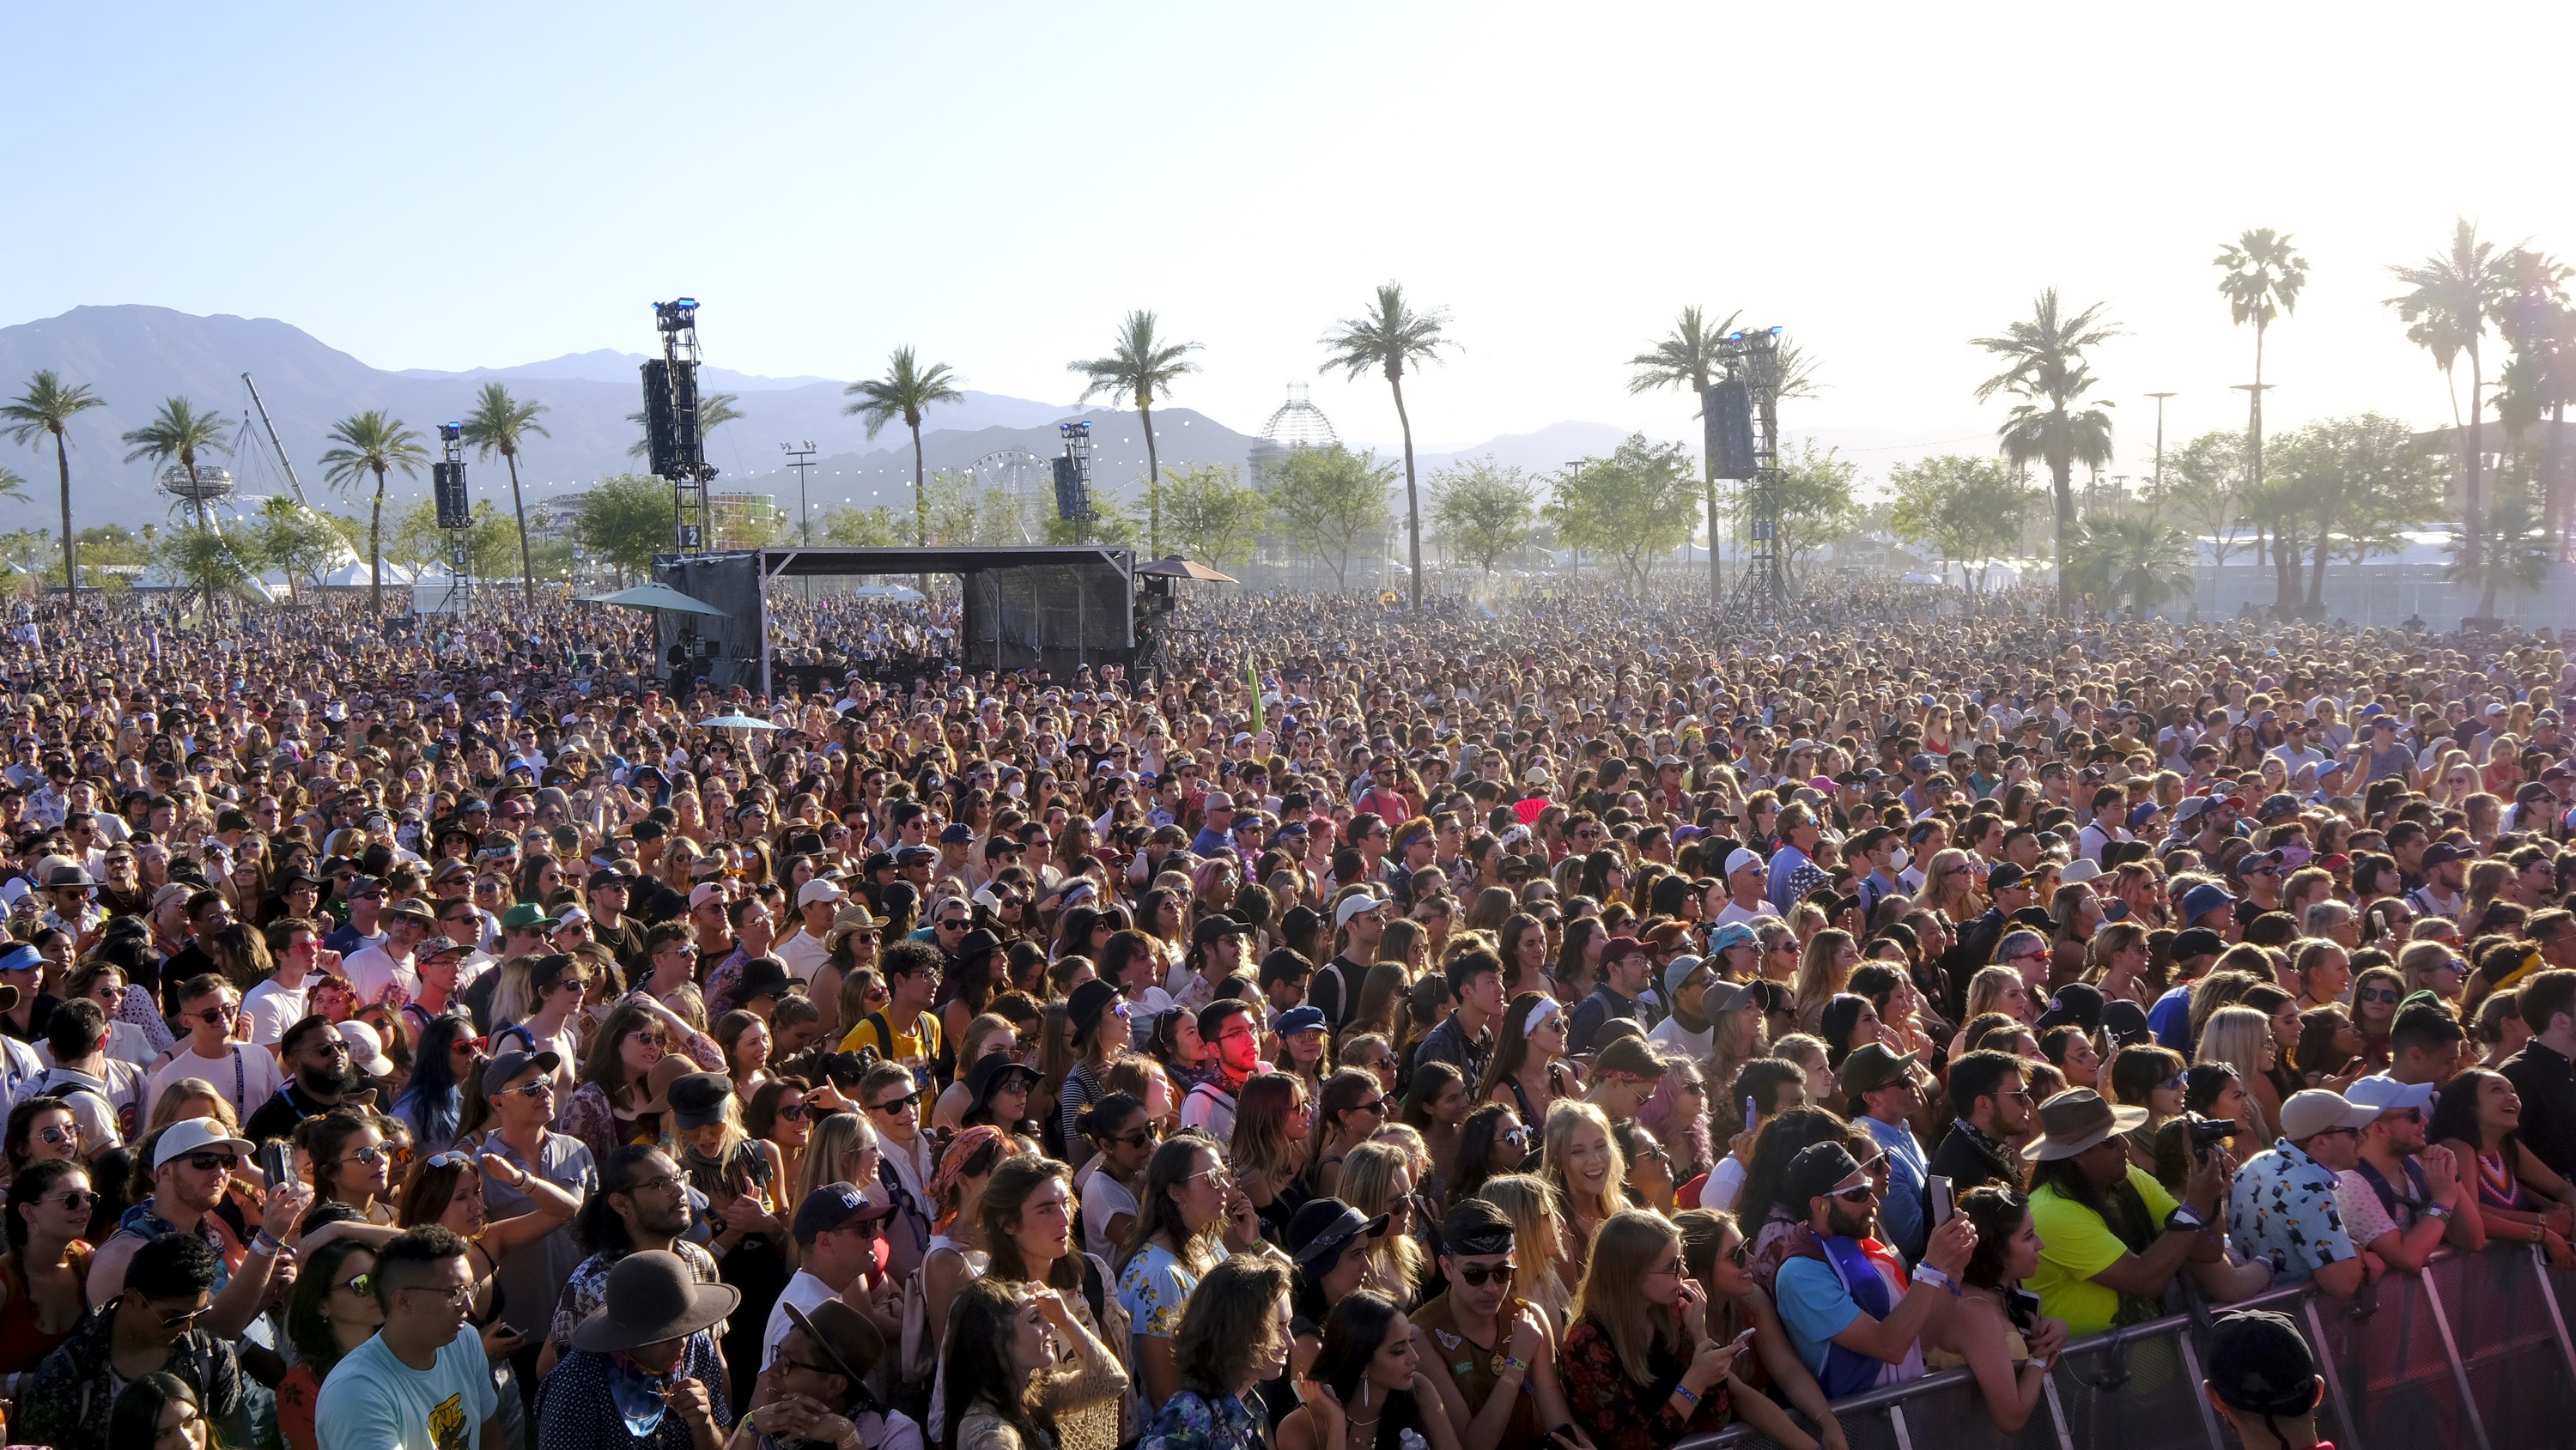 How to watch Coachella 2022 online What to Watch